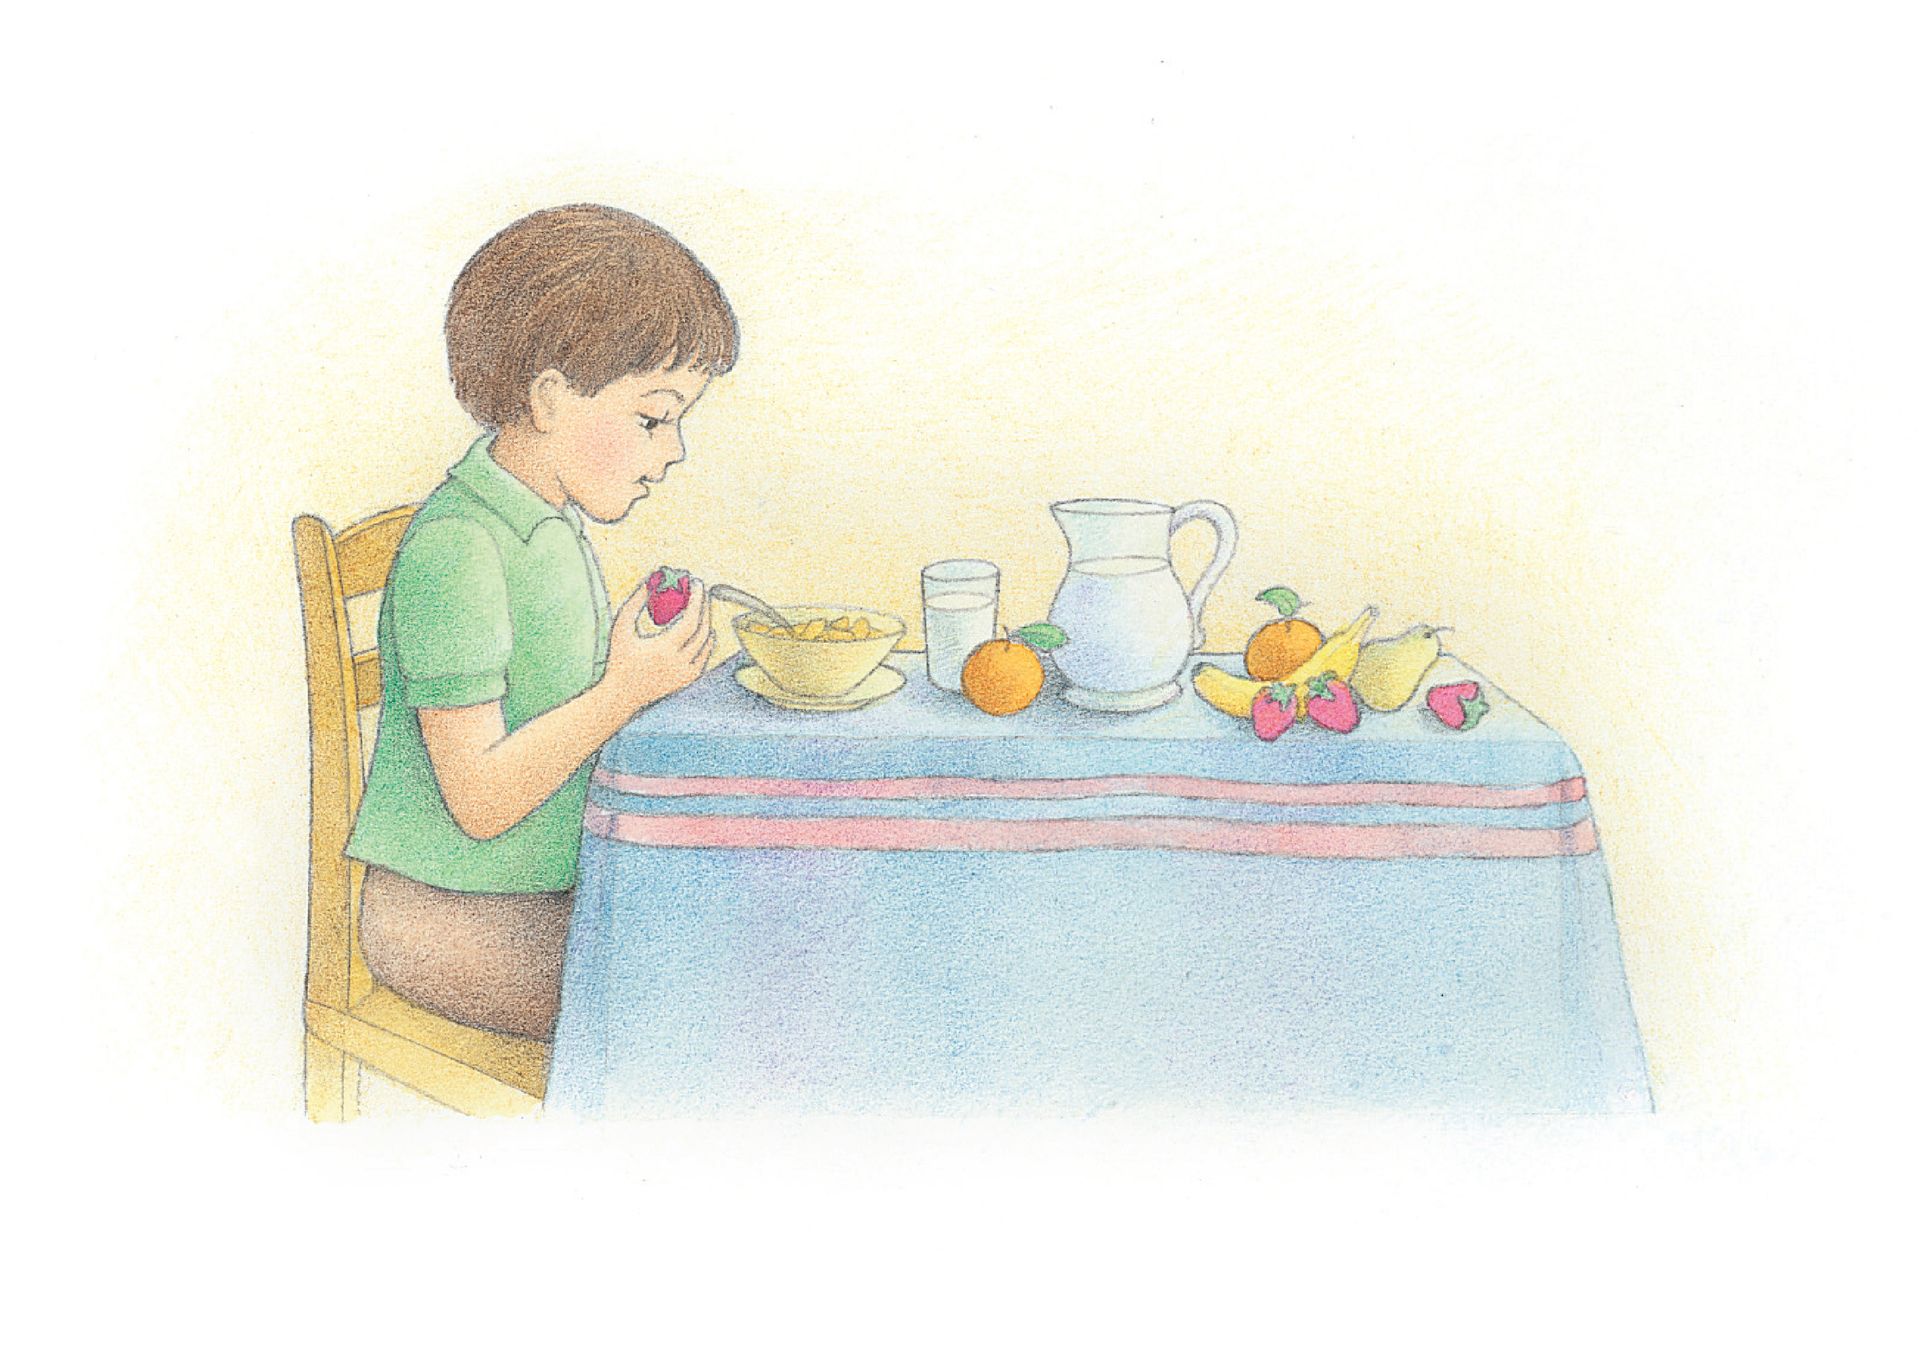 A boy sitting at a table set for breakfast. From the Children’s Songbook, page 154, “The Word of Wisdom”; watercolor illustration by Beth Whittaker.